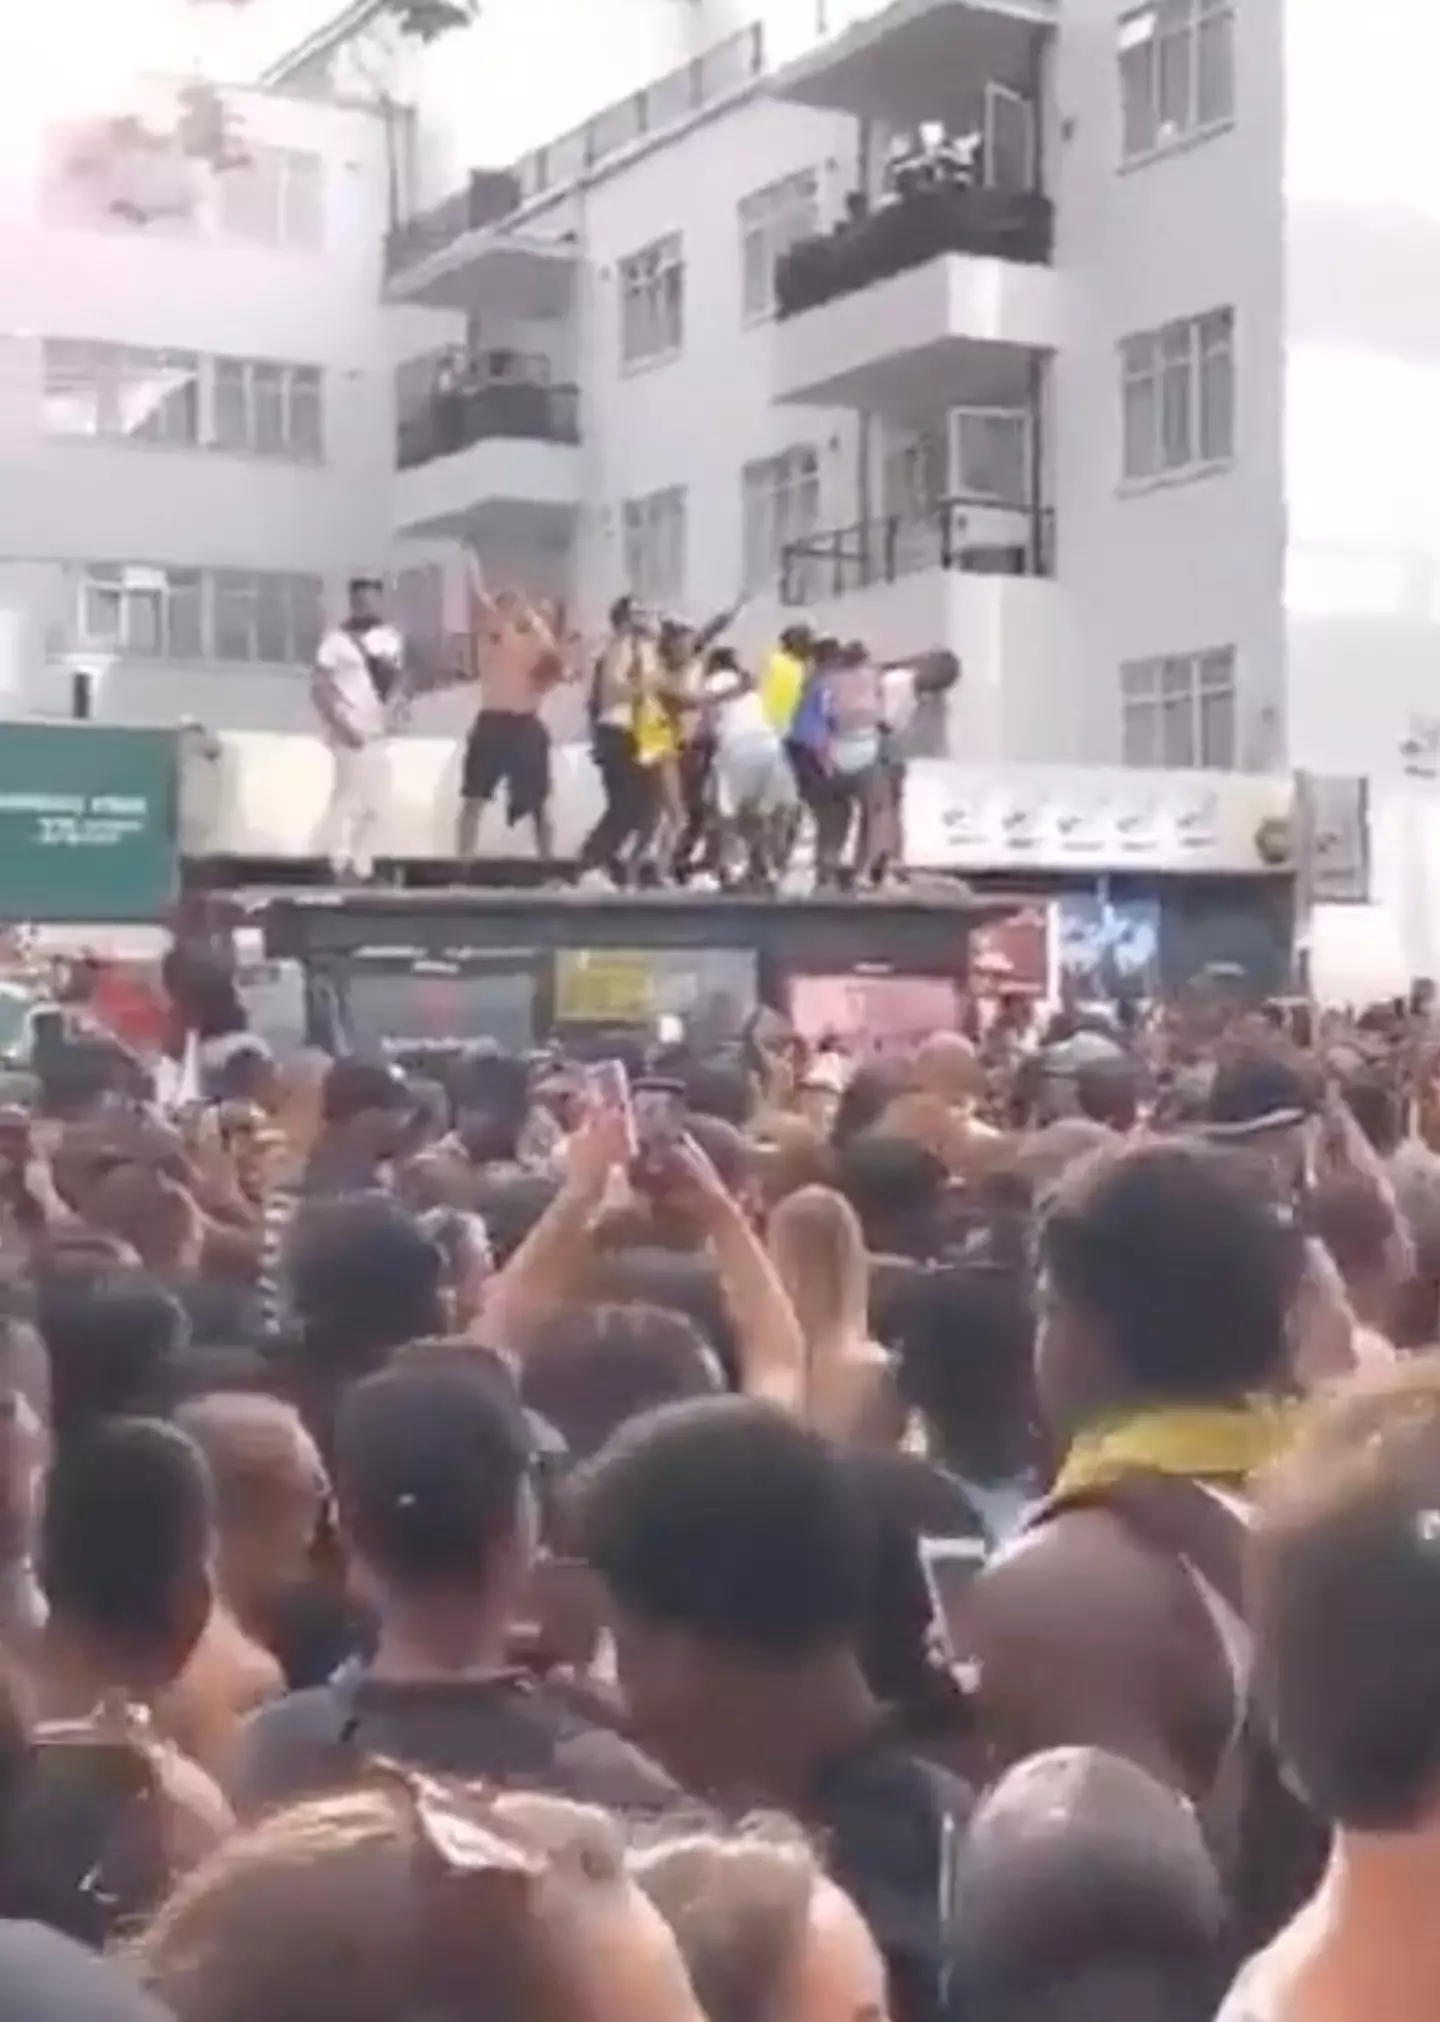 People were seen dancing on a bus shelter during the celebrations.